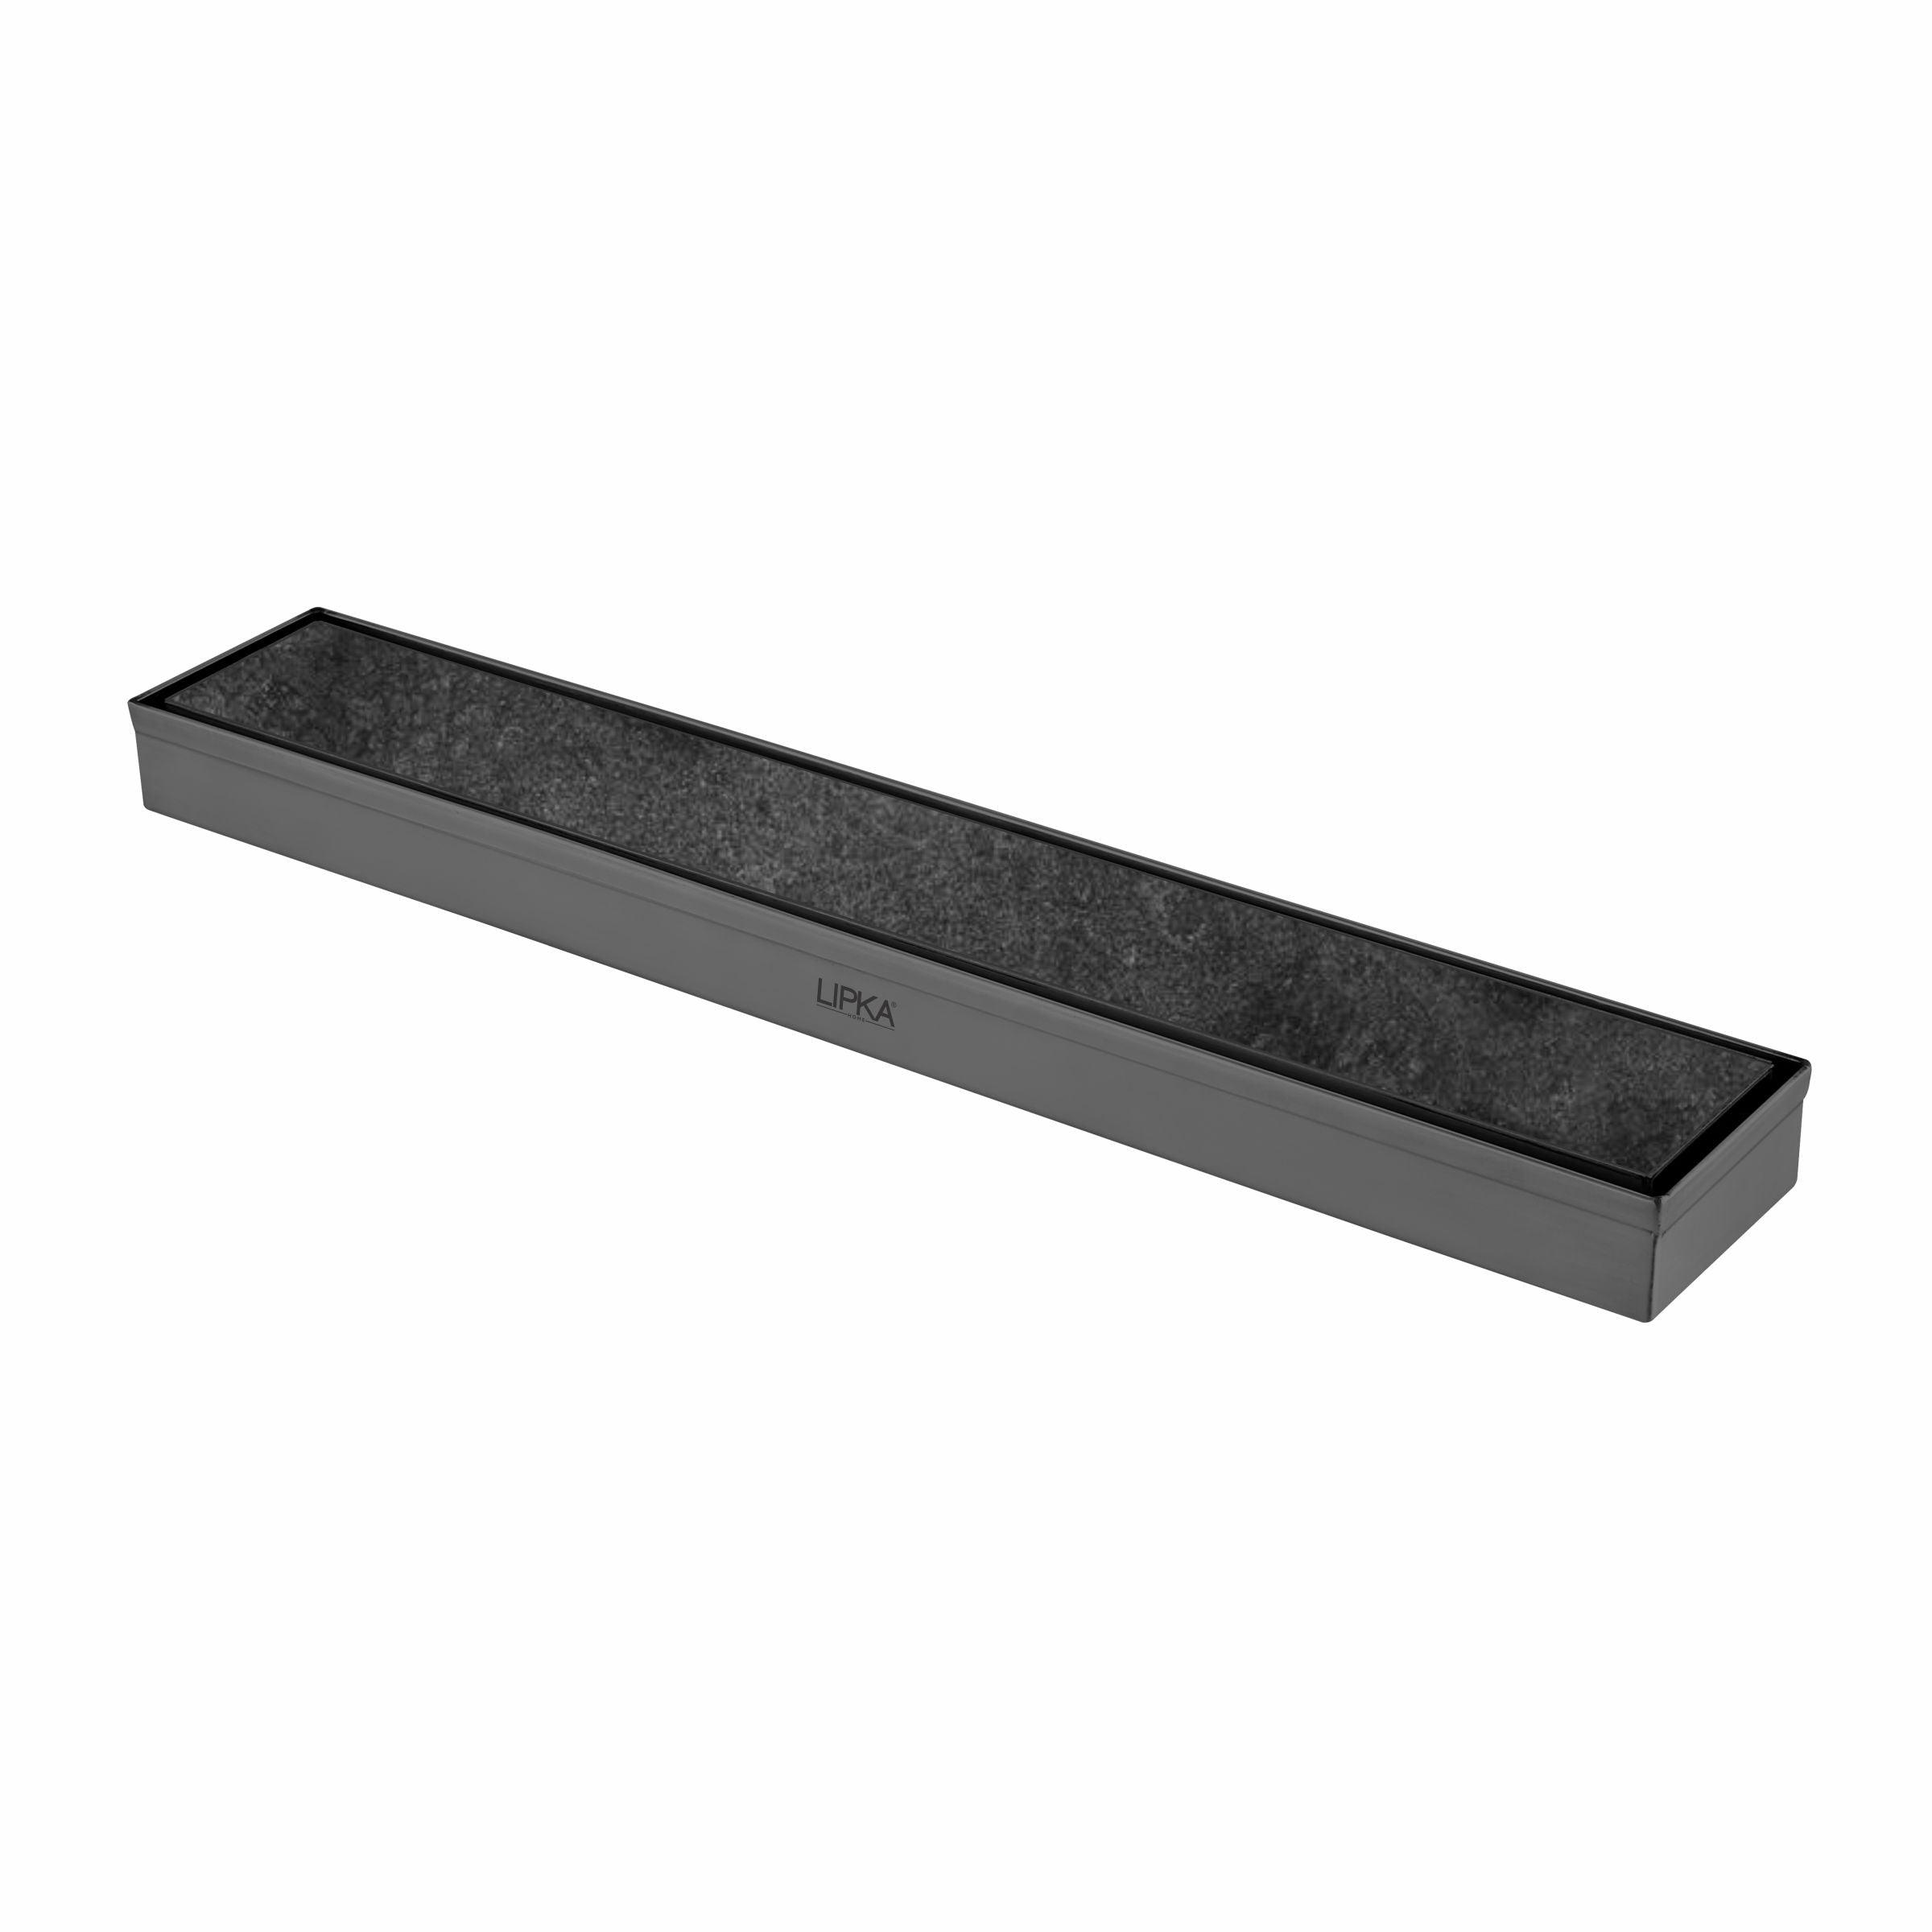 Marble Insert Shower Drain Channel - Black (24 x 2 Inches)